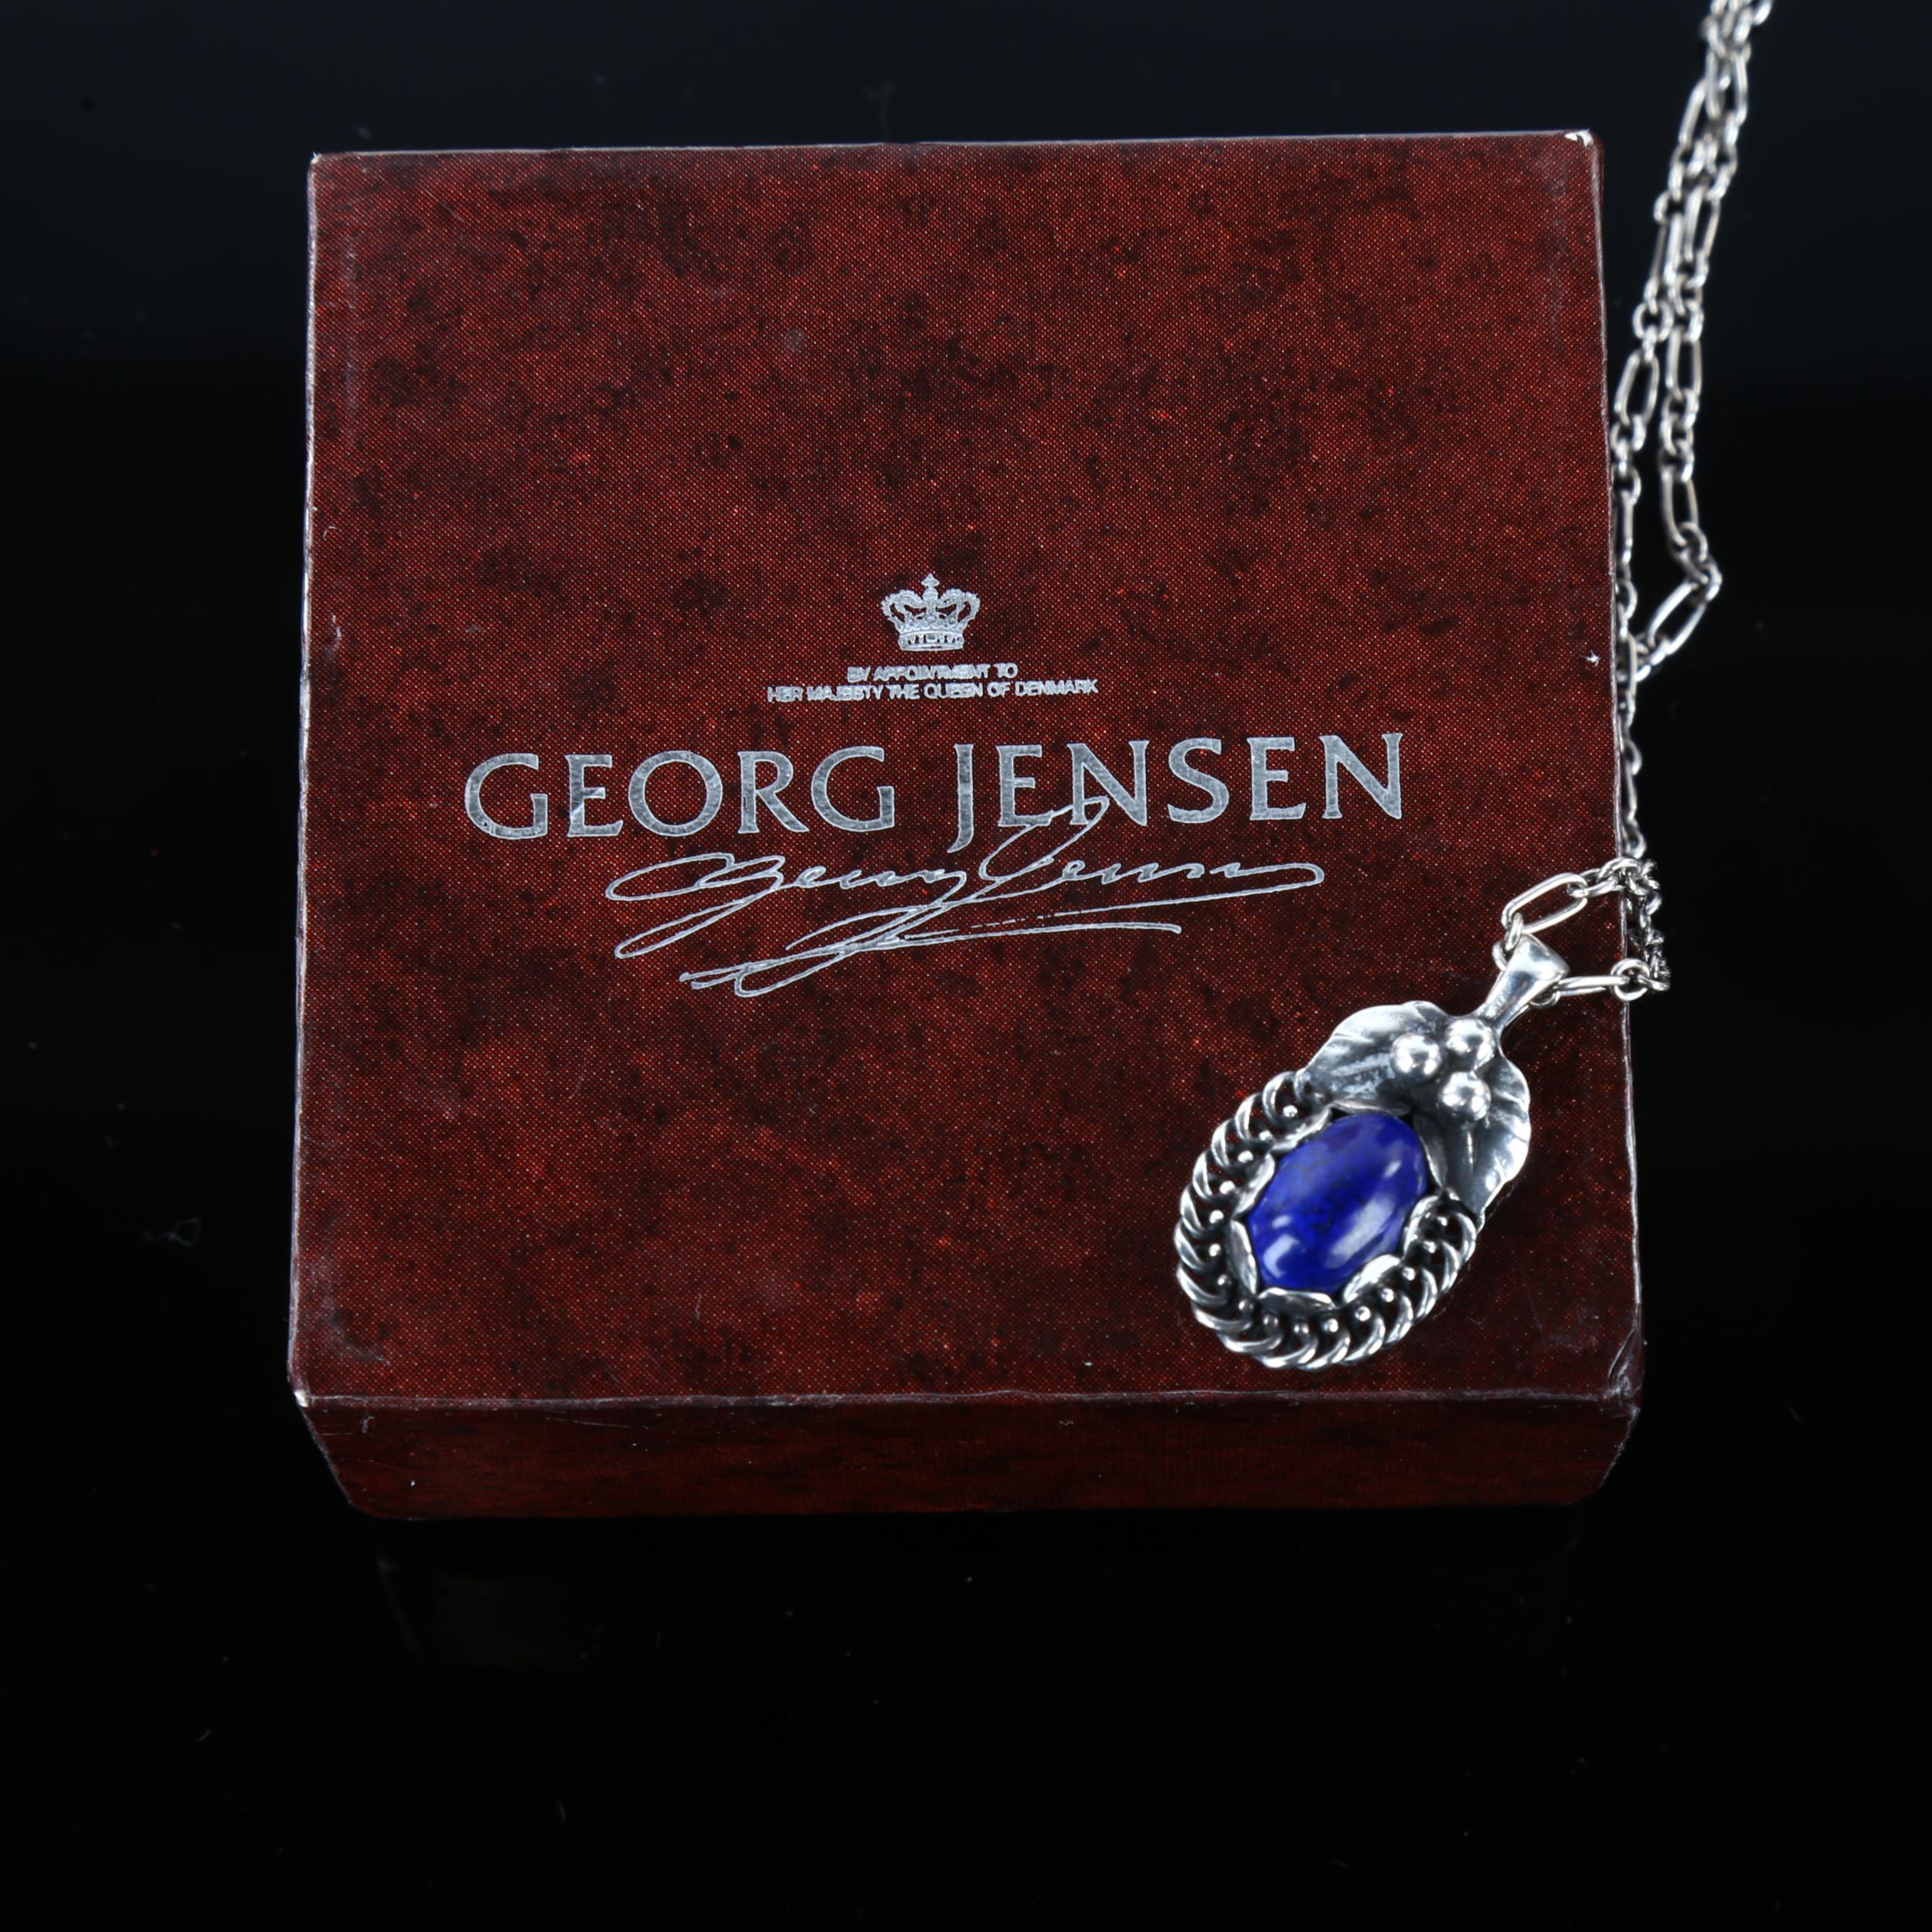 GEORG JENSEN - a Danish stylised sterling silver and lapis lazuli pendant necklace of the year 1992, - Image 4 of 4